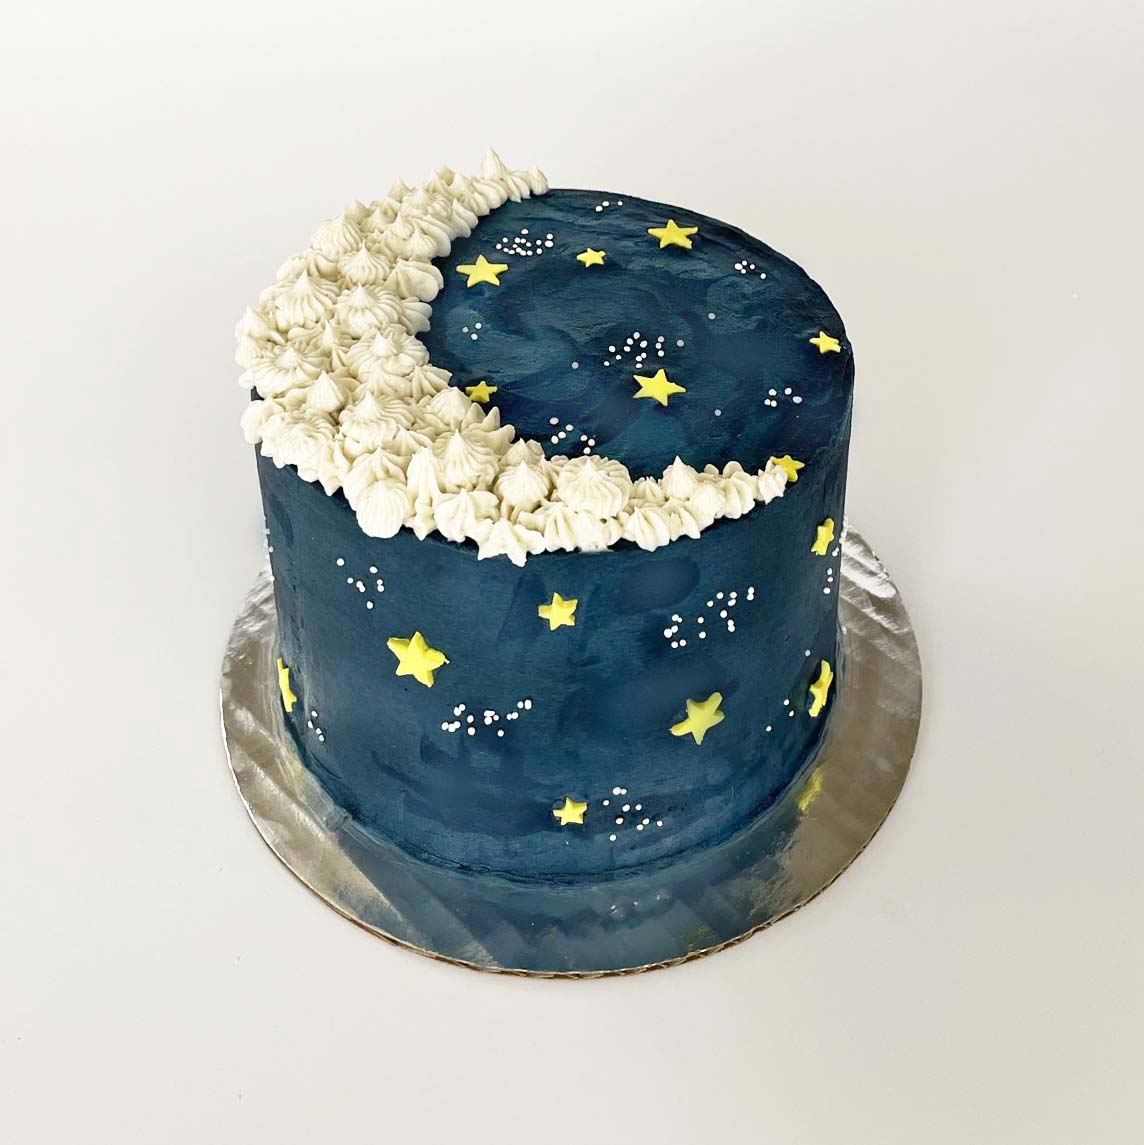  This DIY cake is a whimsical version of the night sky. The cake is coated in dark blue frosting and a crescent moon piped in white frosting across the top. Yellow fondant stars and little constellation of tiny white ball-shaped sprinkles are pressed over the front and sides.